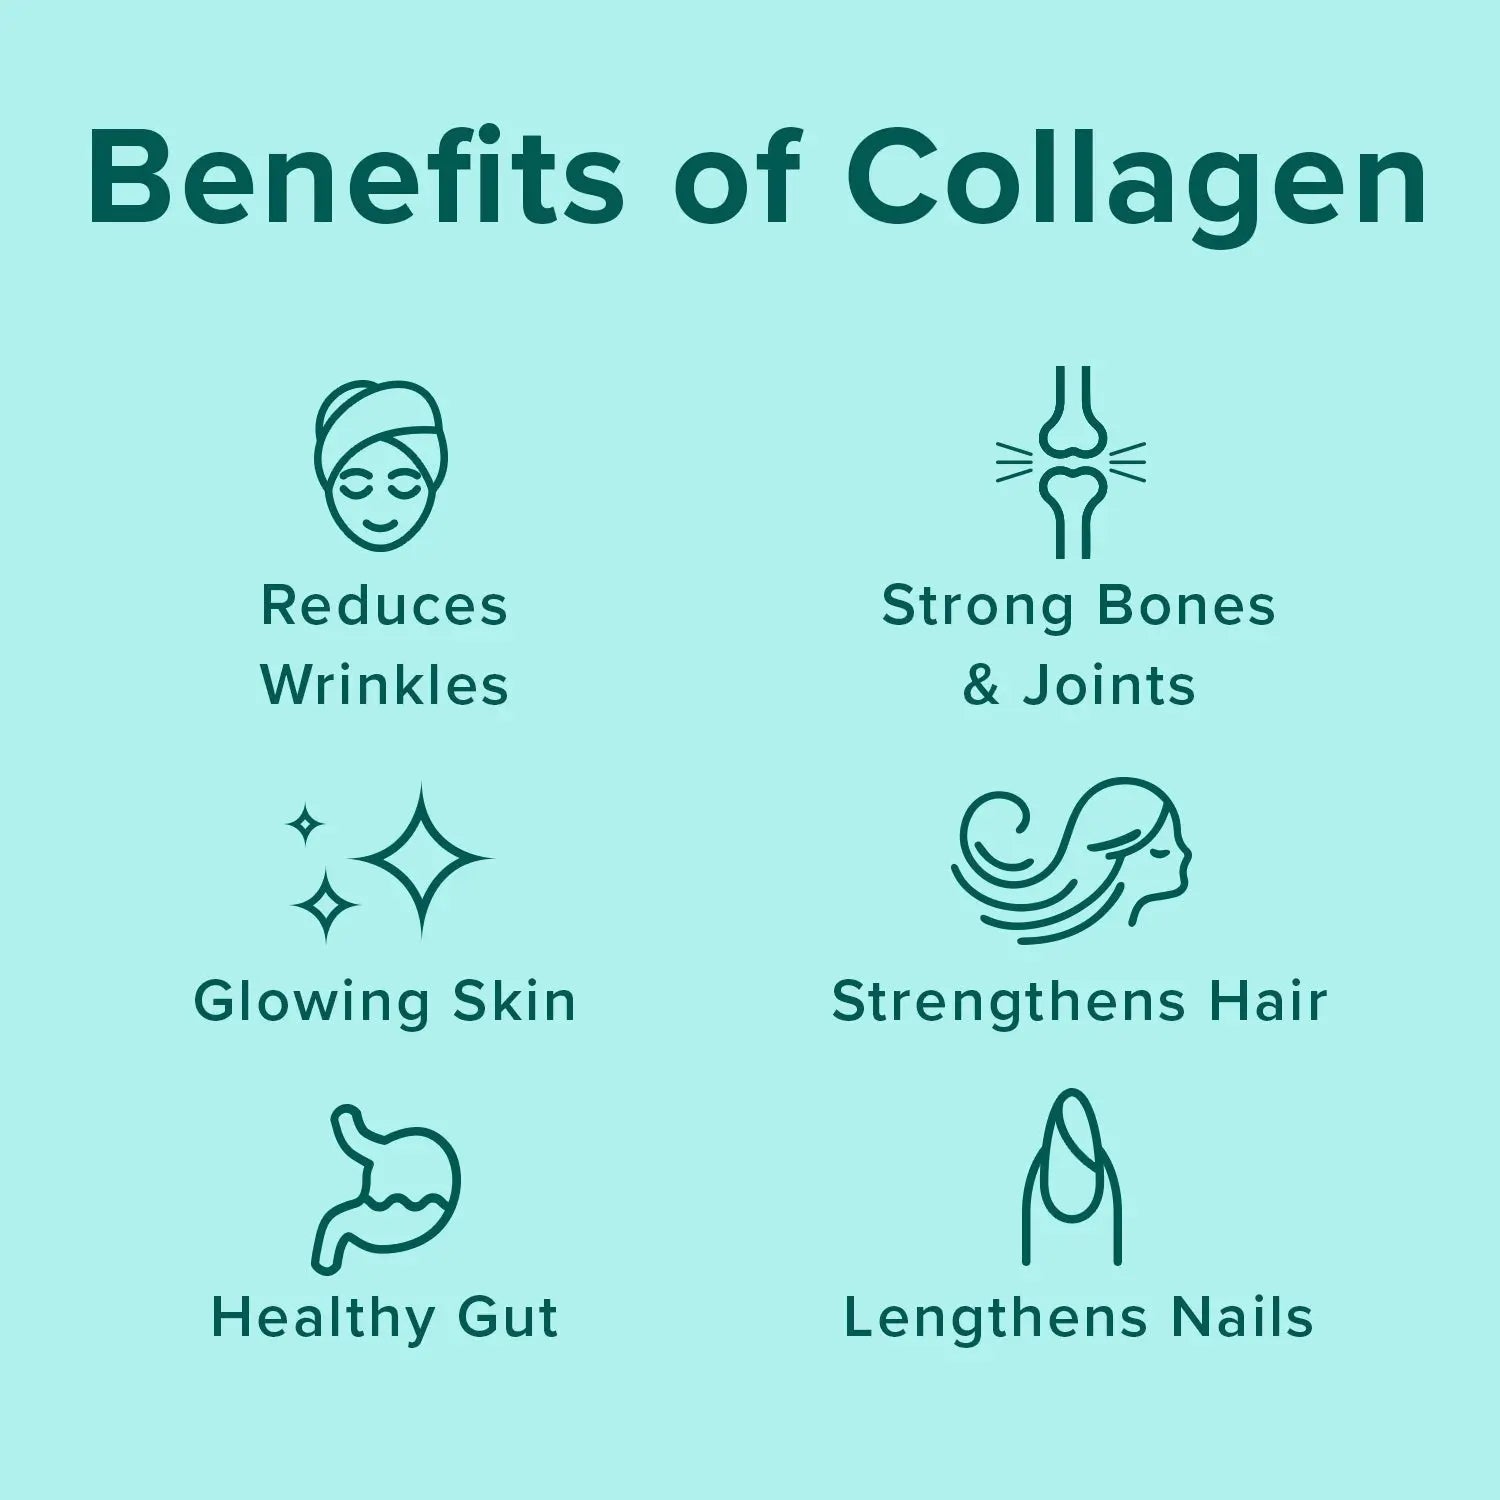 Benefits of Collagen - reduces wrinkes, glowing skin, healthy gut, strong bones & joints, strengthens hair, lengthens nails